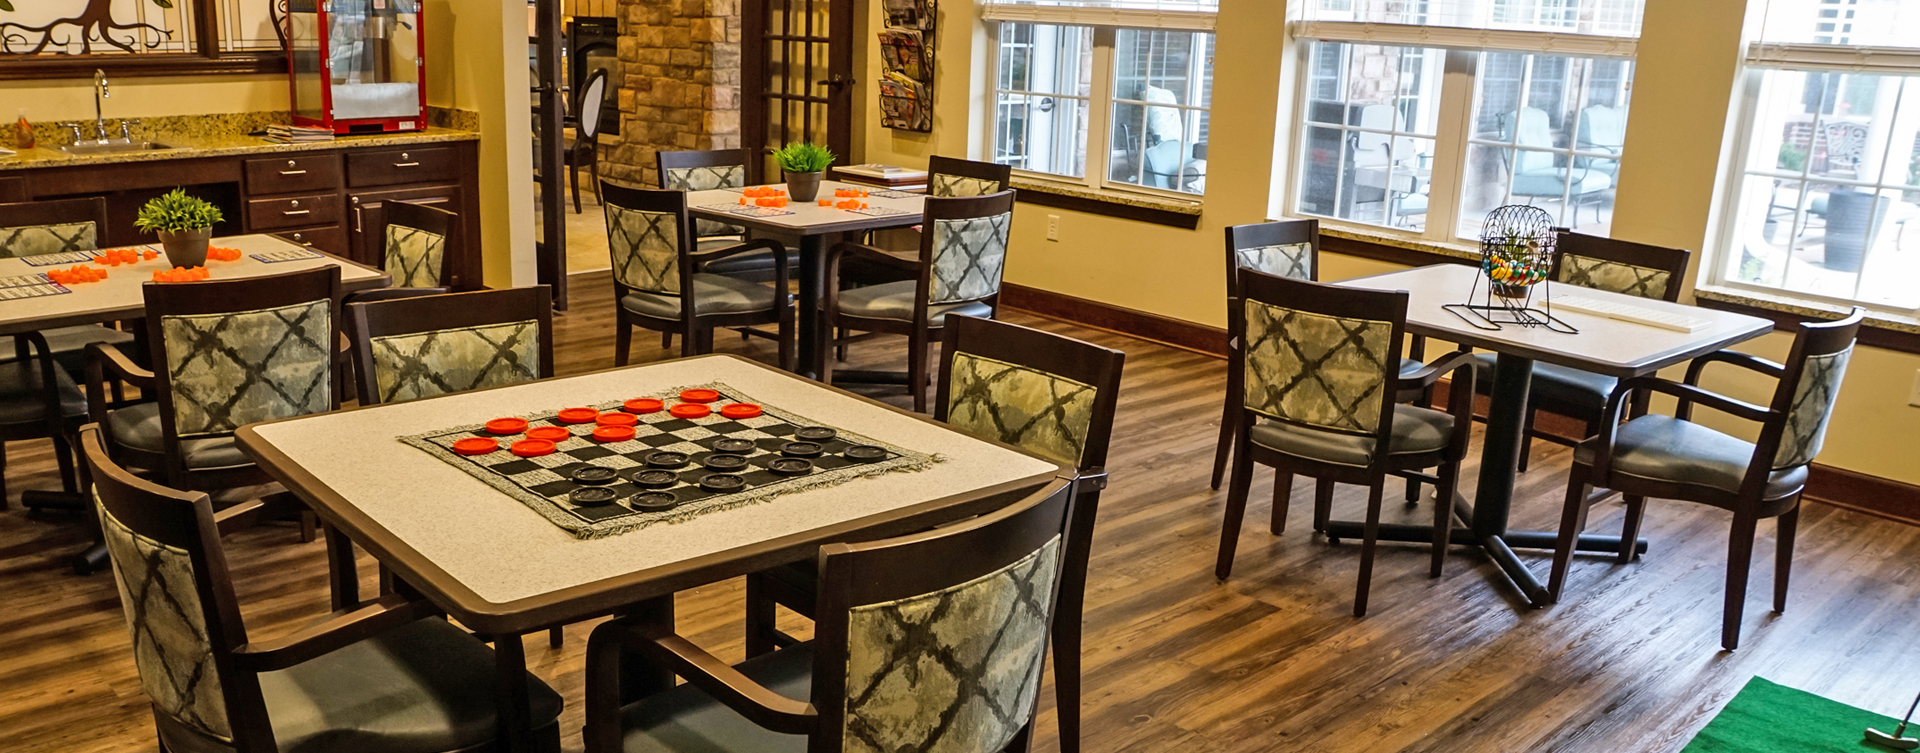 Enjoy a good card game with friends in the activity room at Bickford of Aurora